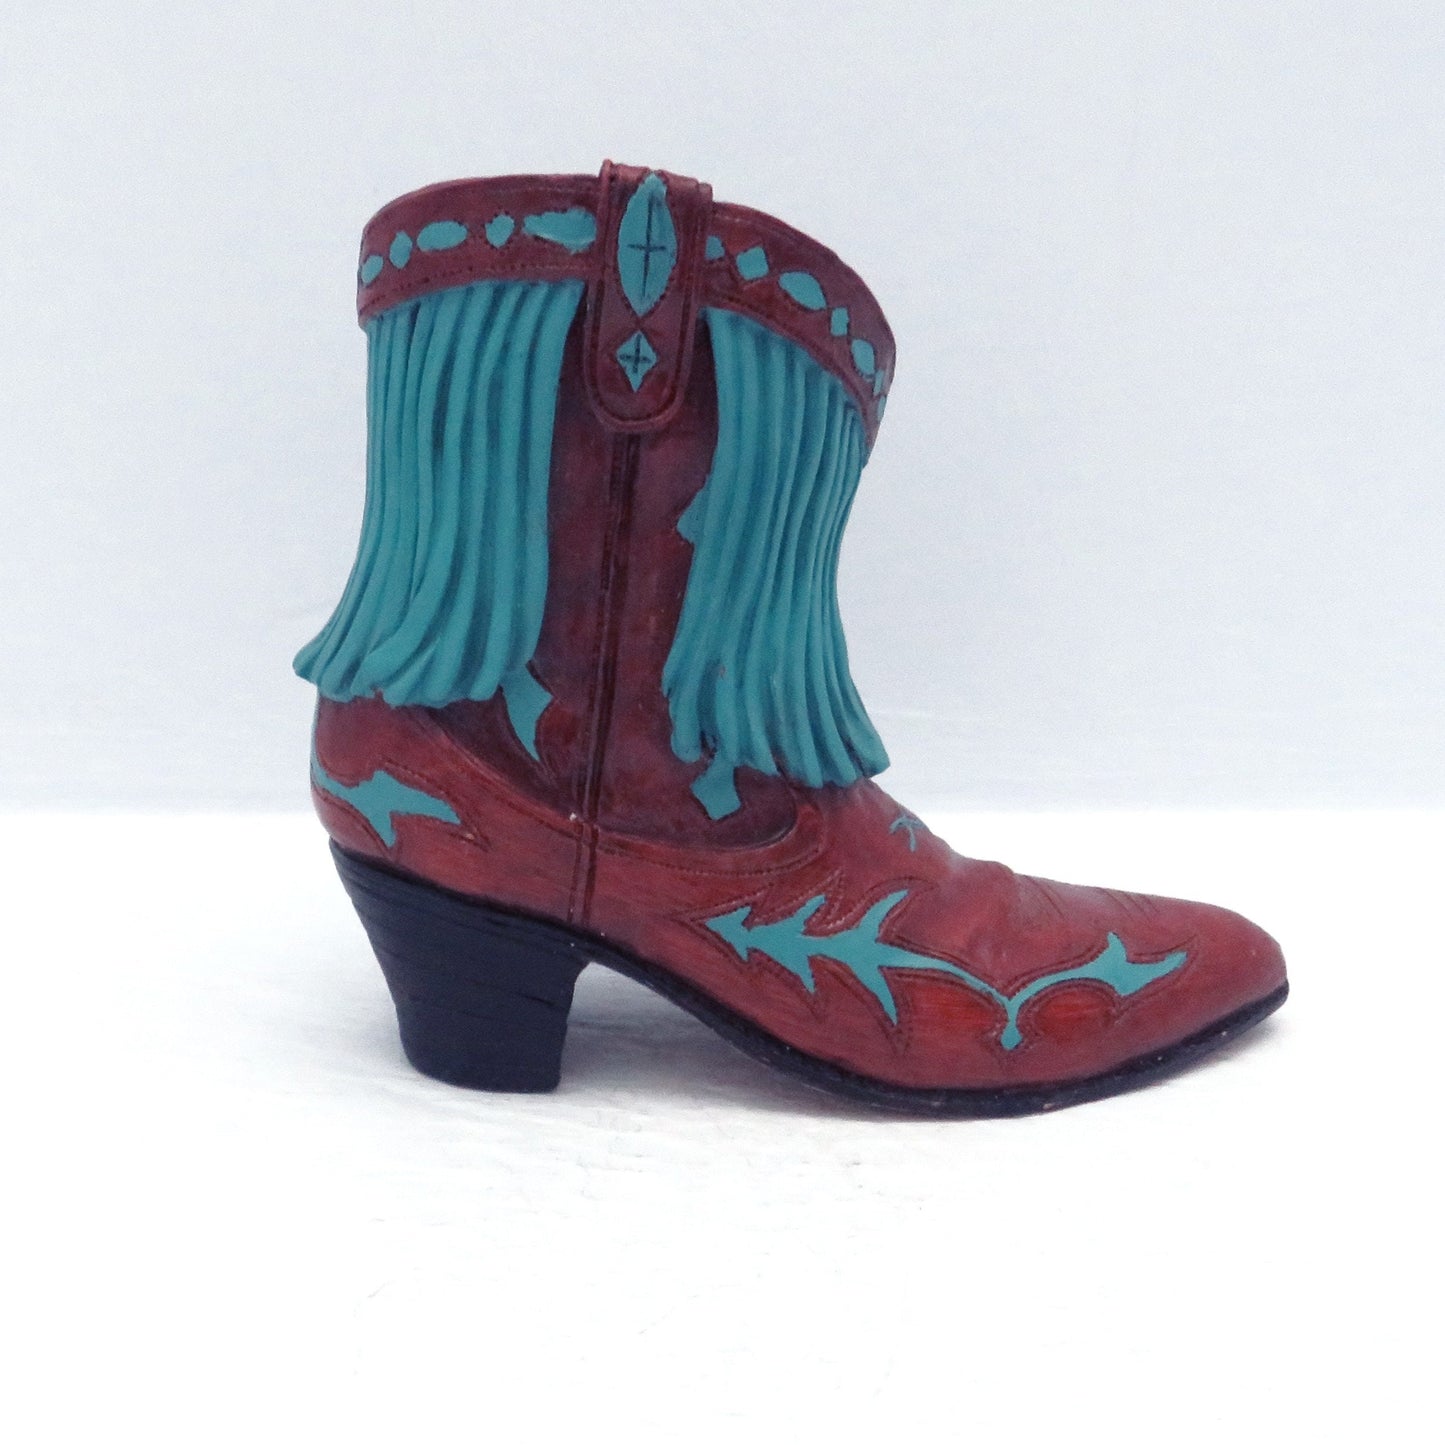 Vintage Resin Brown Cowboy Boot With Turquoise Fringe Figurine / Cowboy Decor / Western Decor / Cowboy Boot Lover Gift /